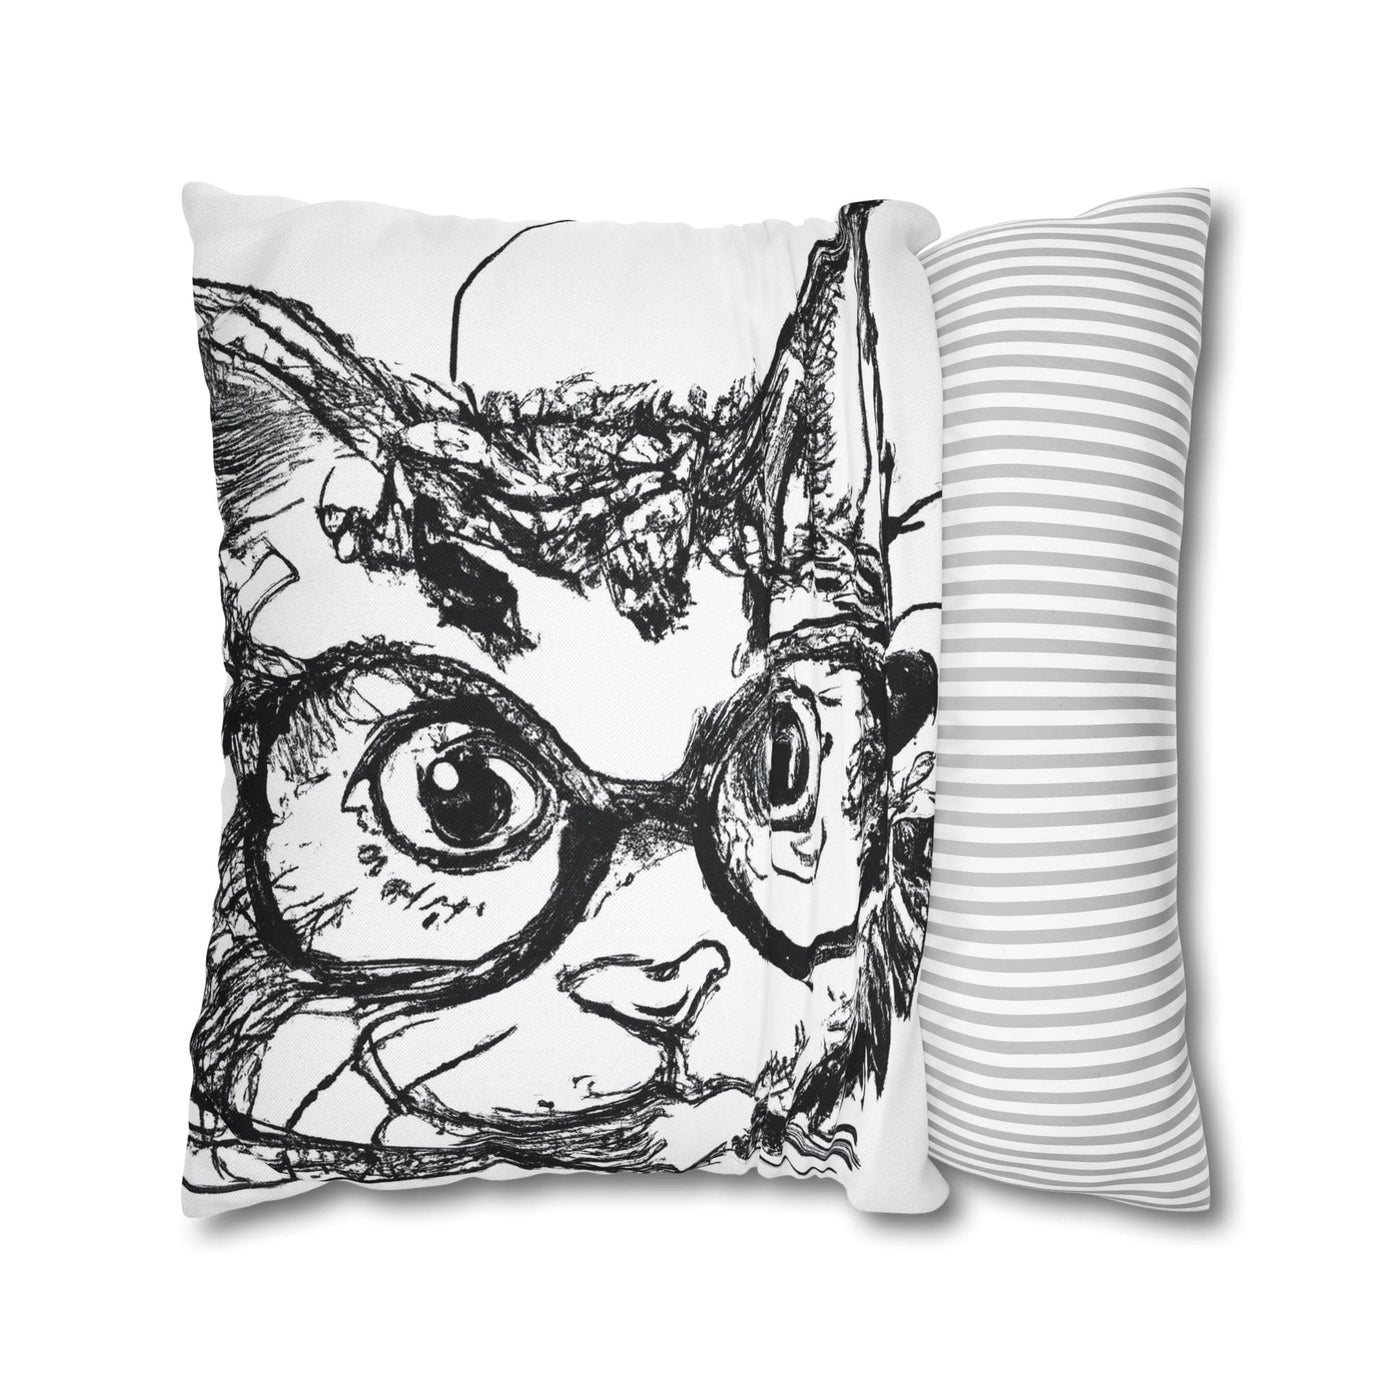 Decorative Throw Pillow Covers With Zipper - Set Of 2 Black And White Intense